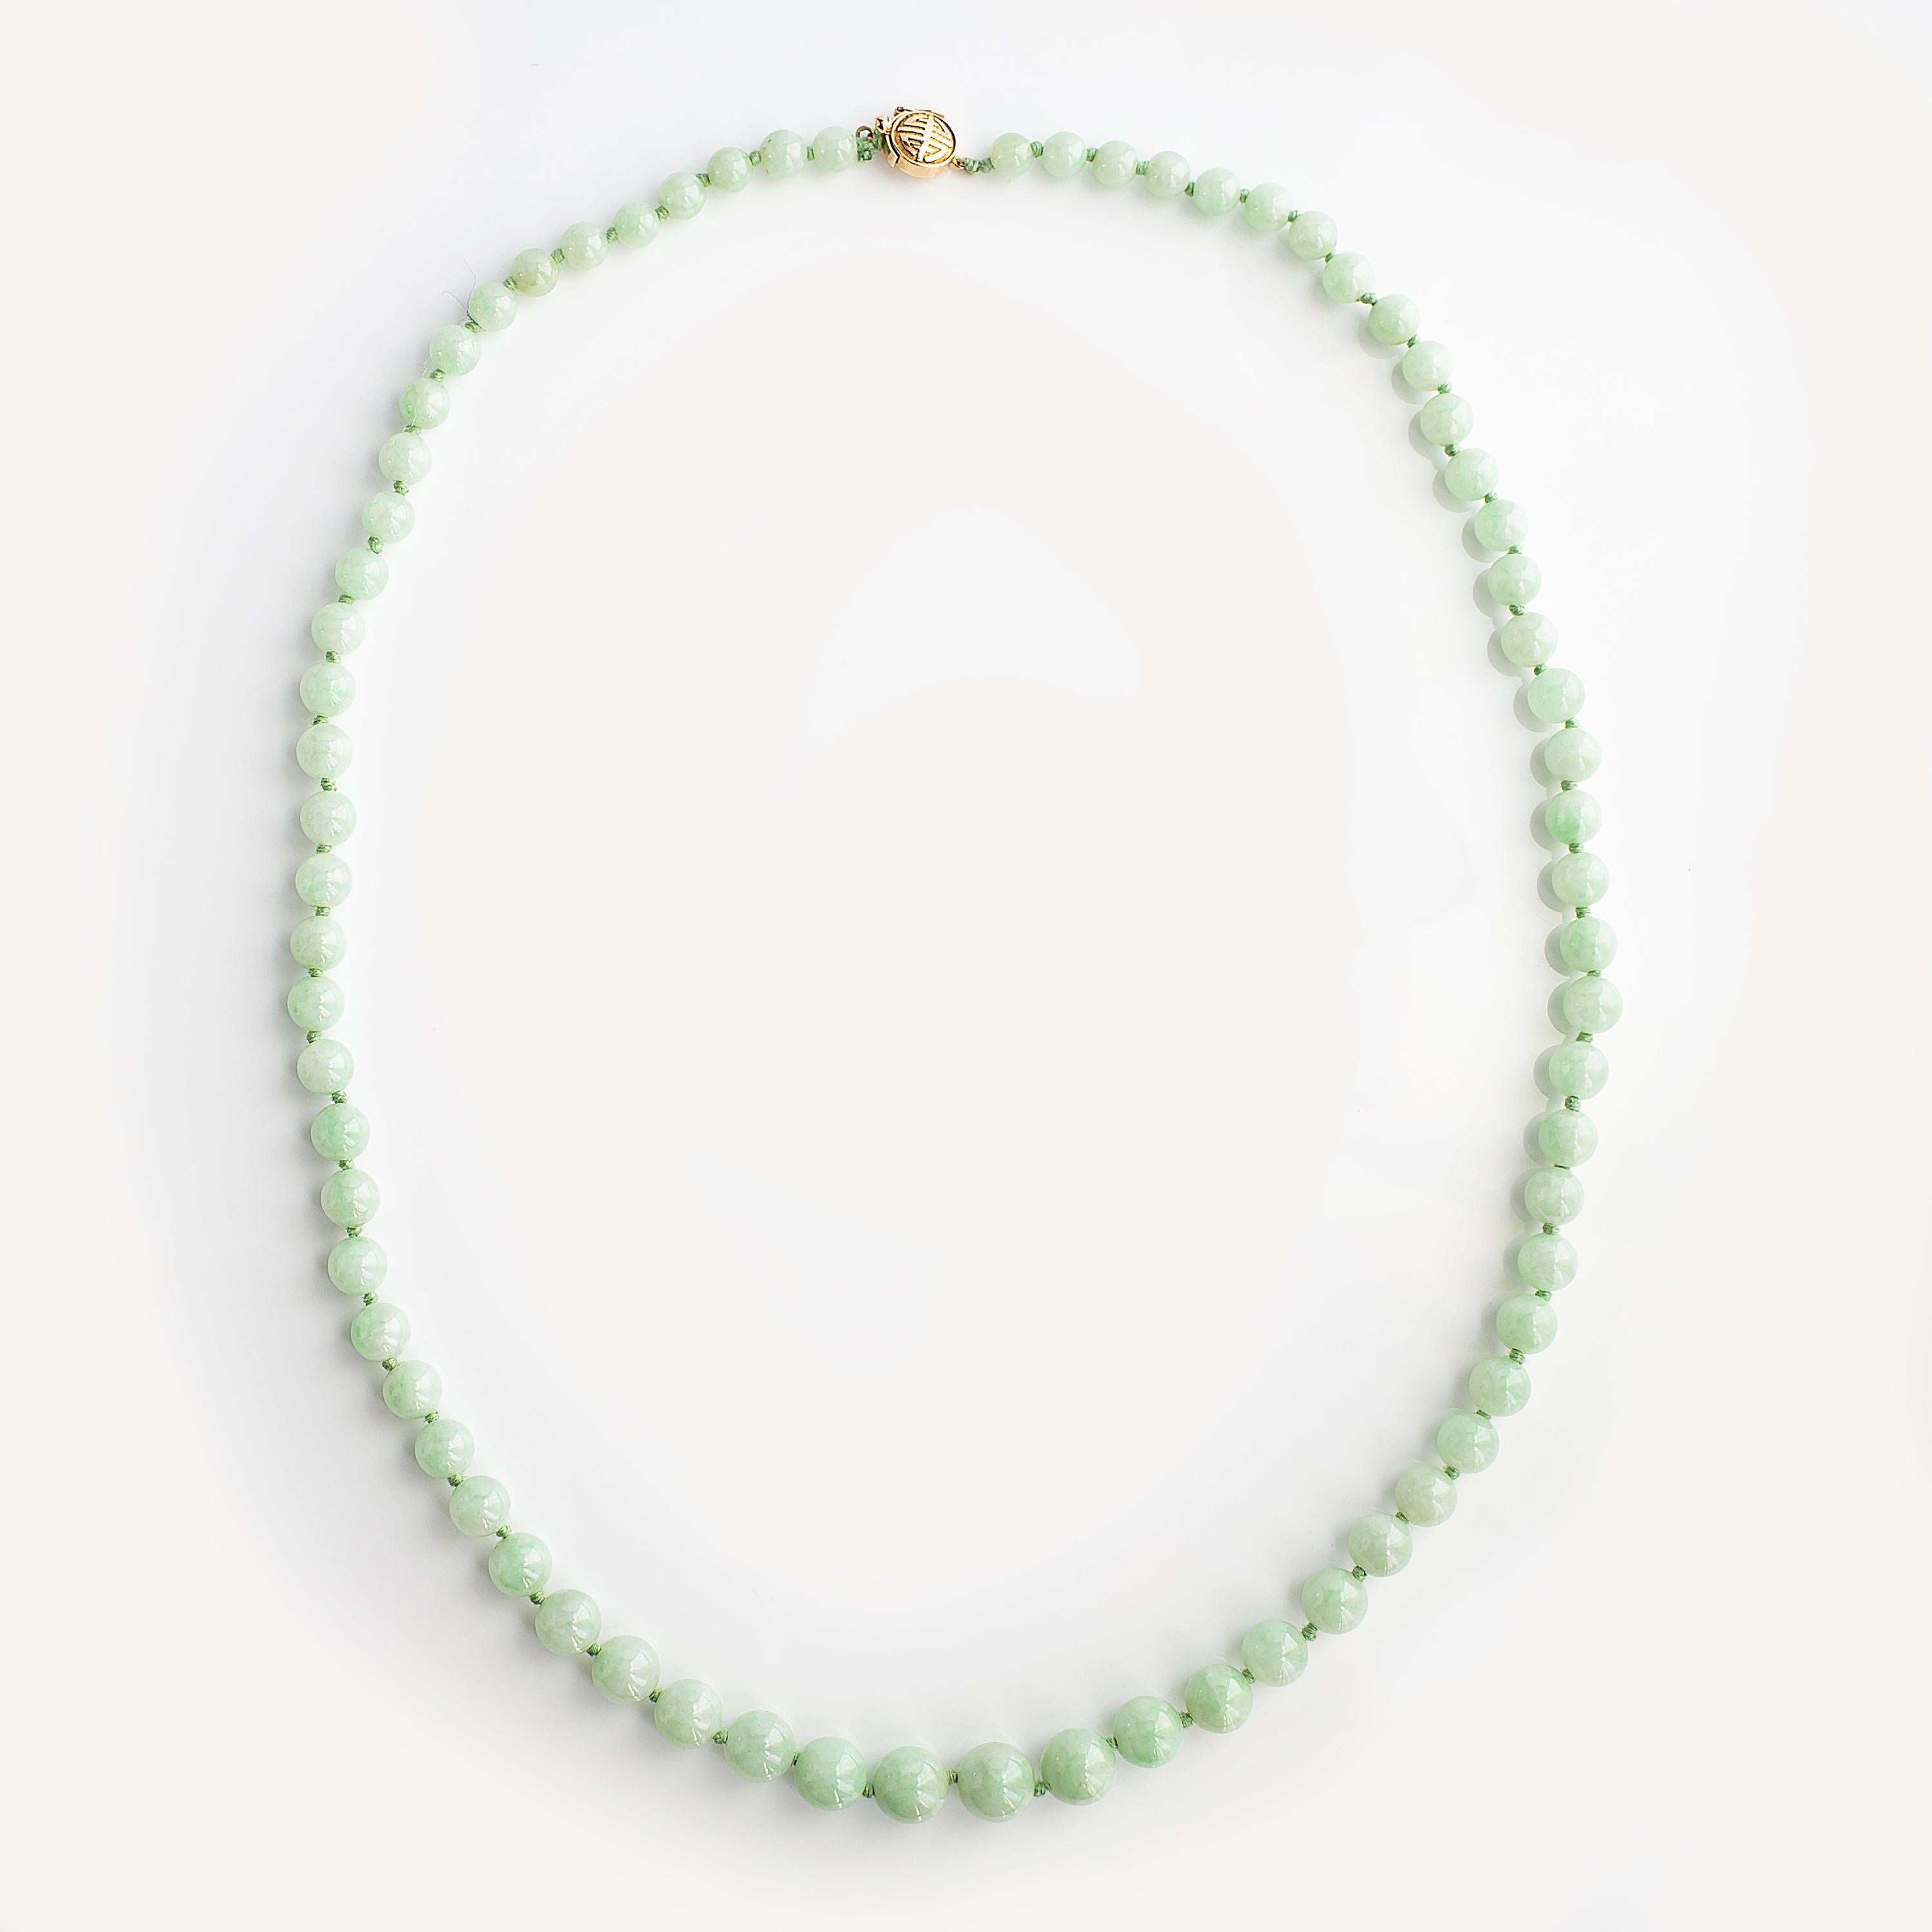 It's like this: what Harry Winston is to diamonds, Gump's was to jade. The legendary San Francisco store was famous around the world for its superb, high-quality and always 100% natural and untreated jadeite and nephrite jade jewelry. My grandmother